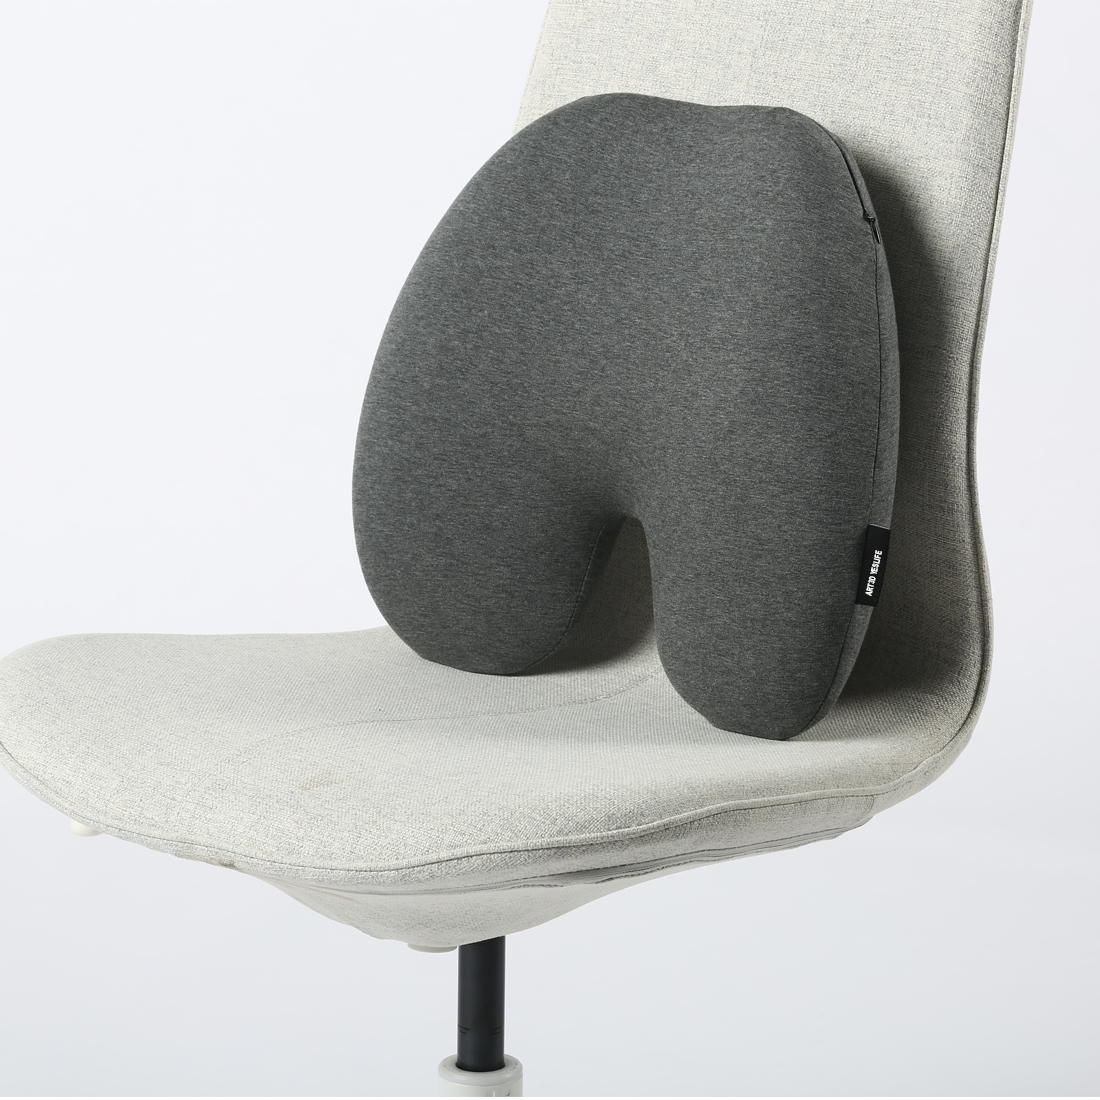 1118 Recommended Office Chair For Lower Back Pain - Image Inspiration